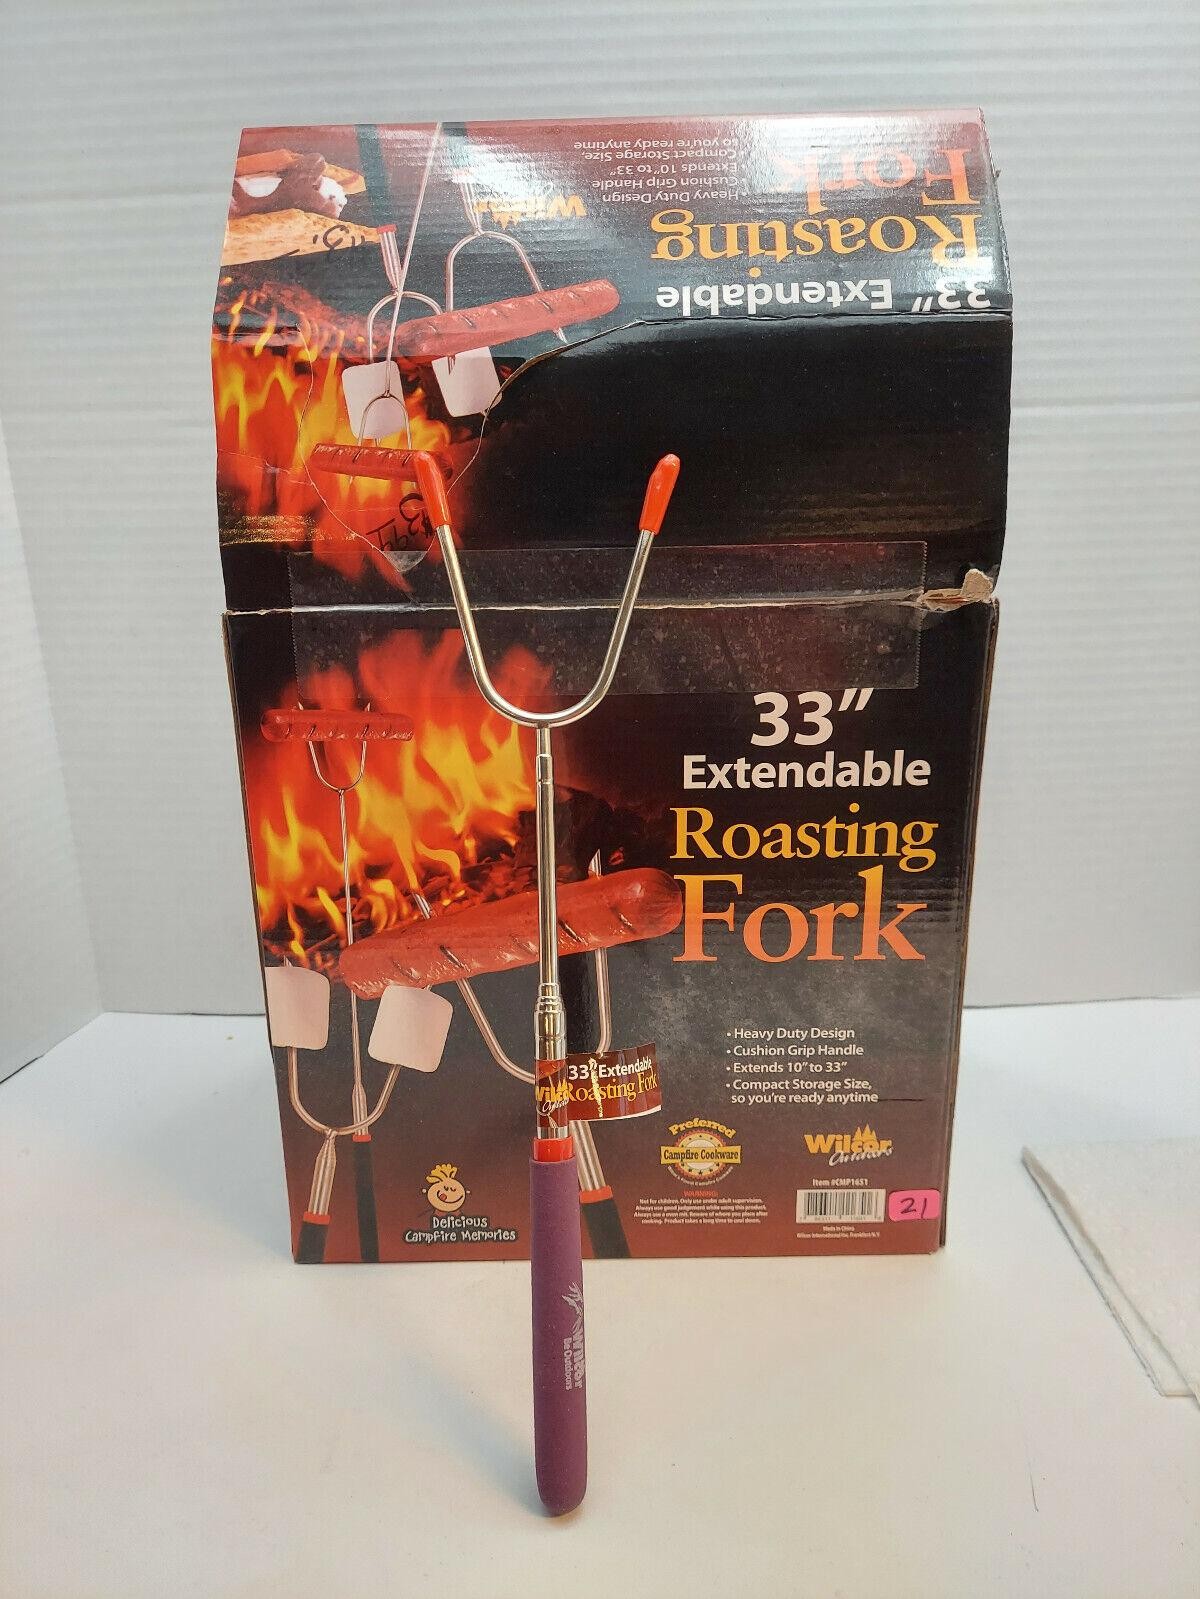 HEAVY DUTY 33" Extendable Roasting Fork by WILCOR